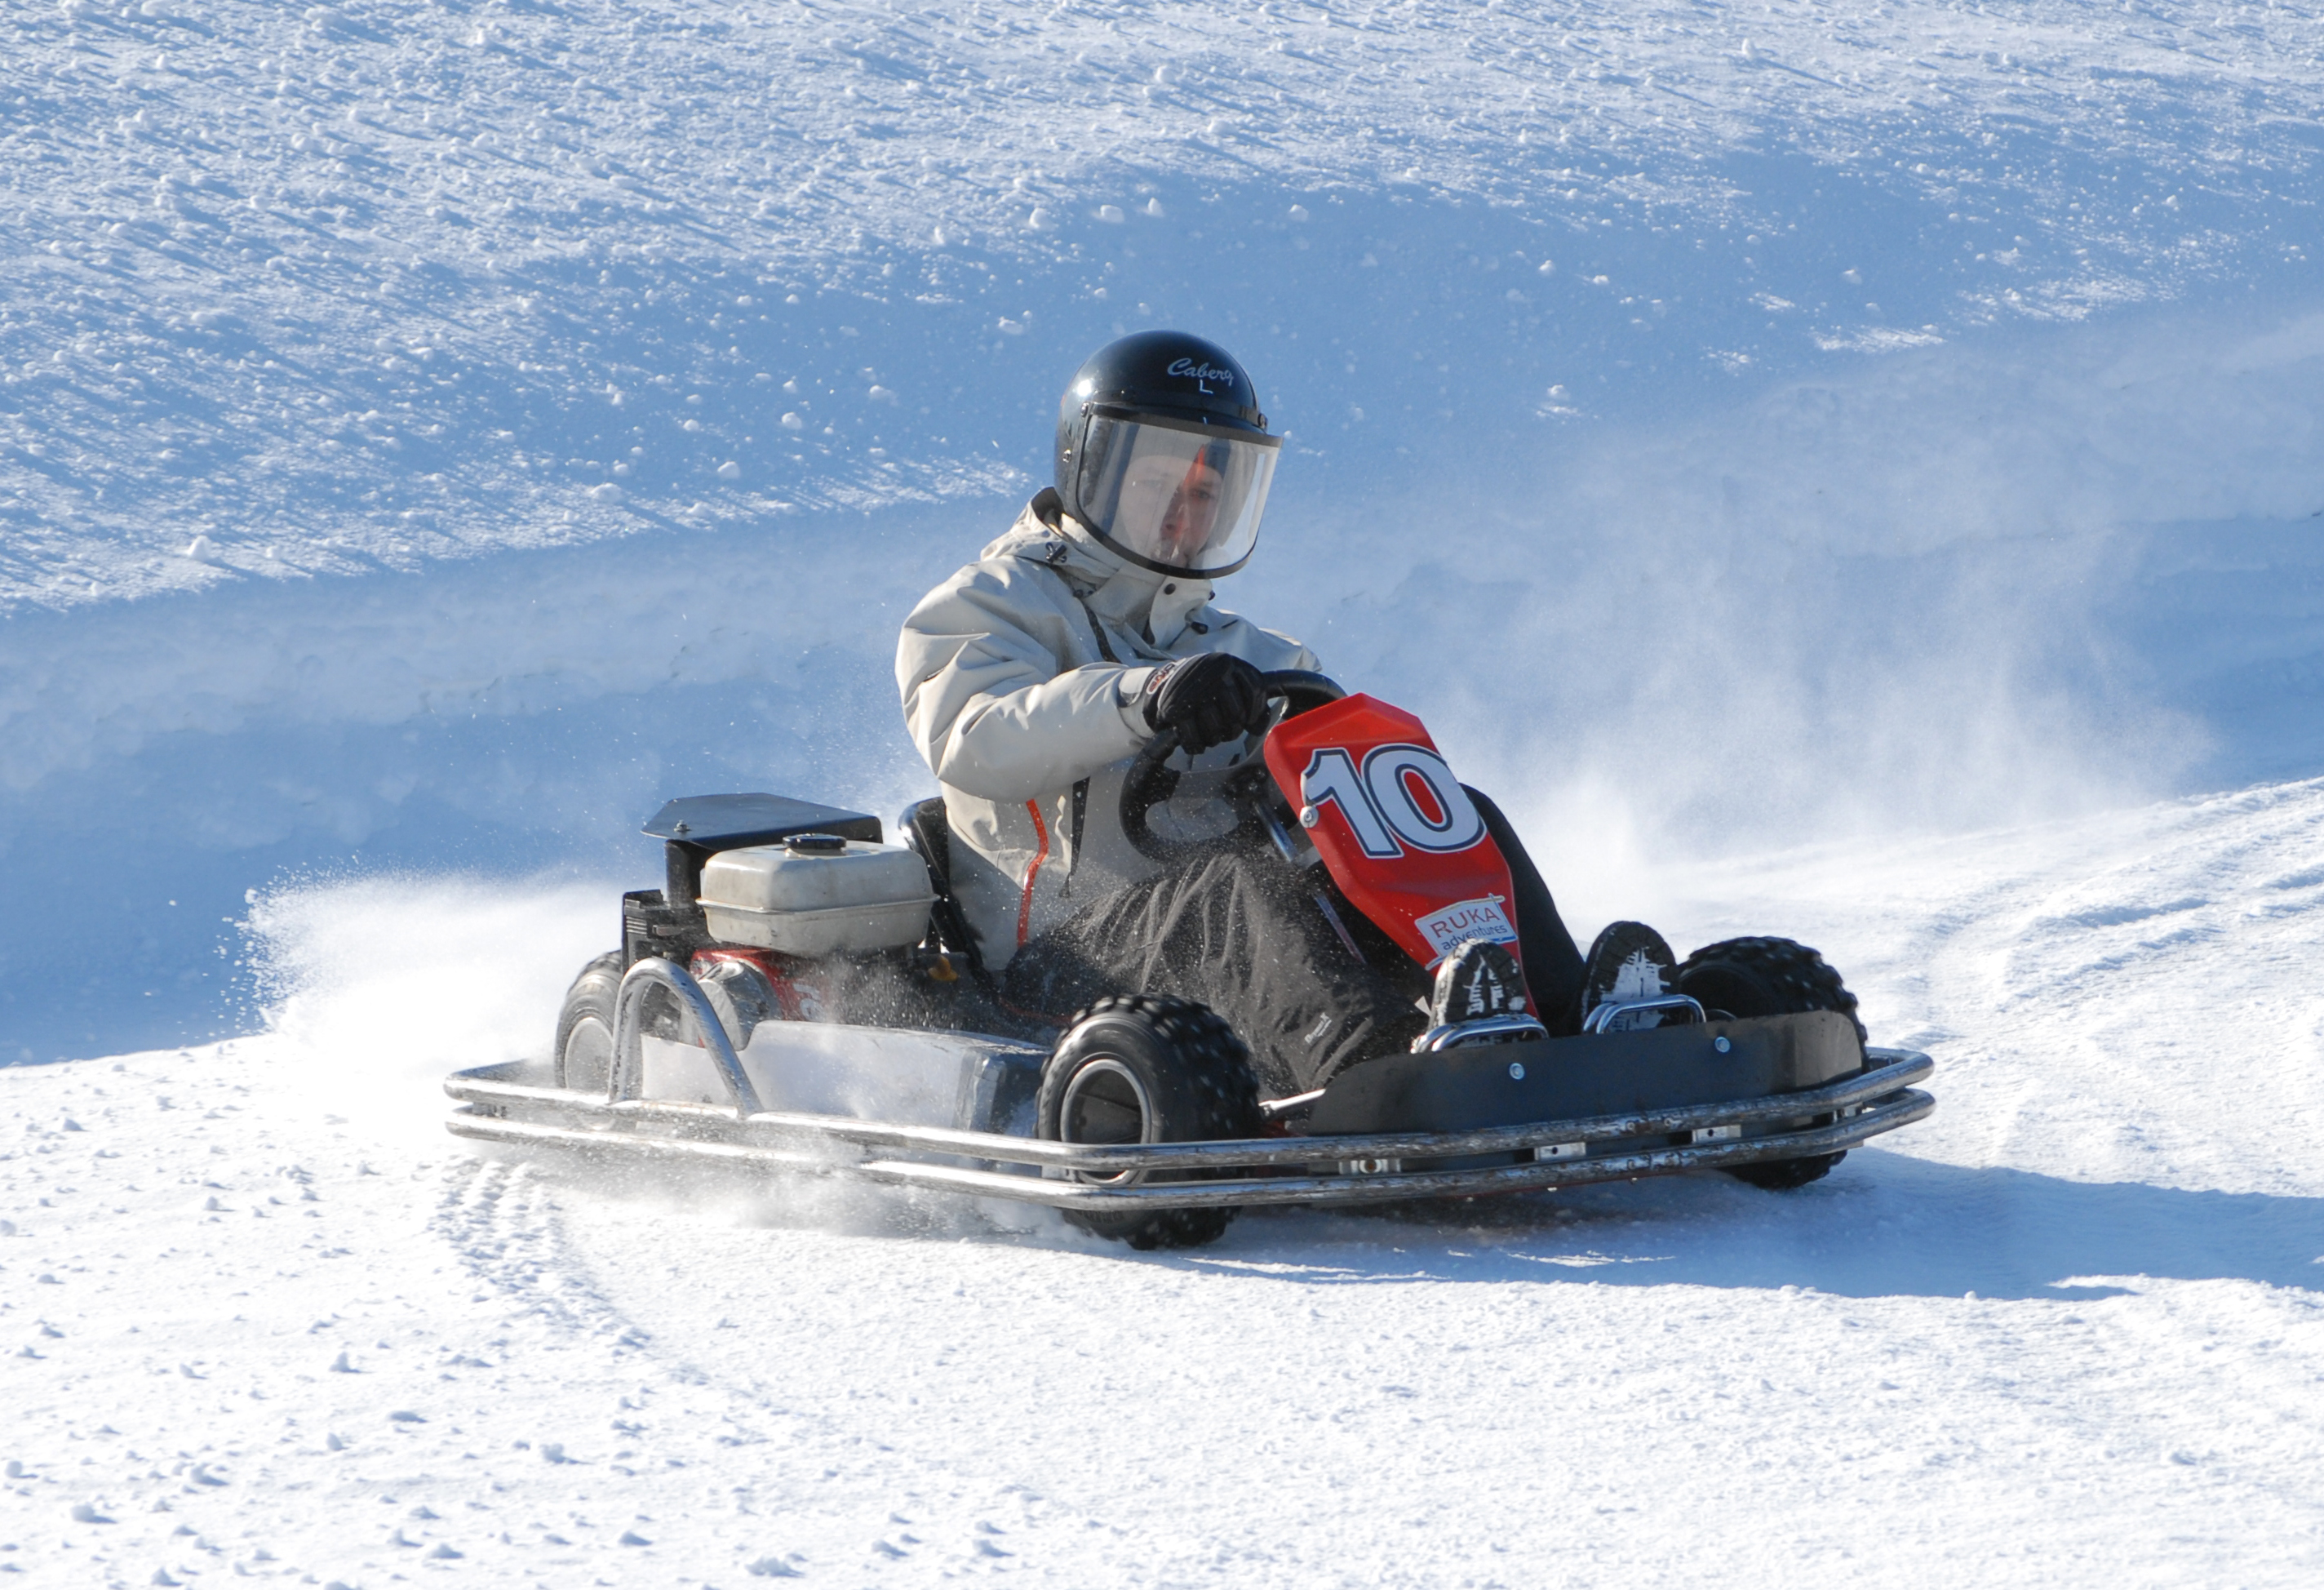 A person in a helmet and winter gear drives an ice kart labeled with the number 10.